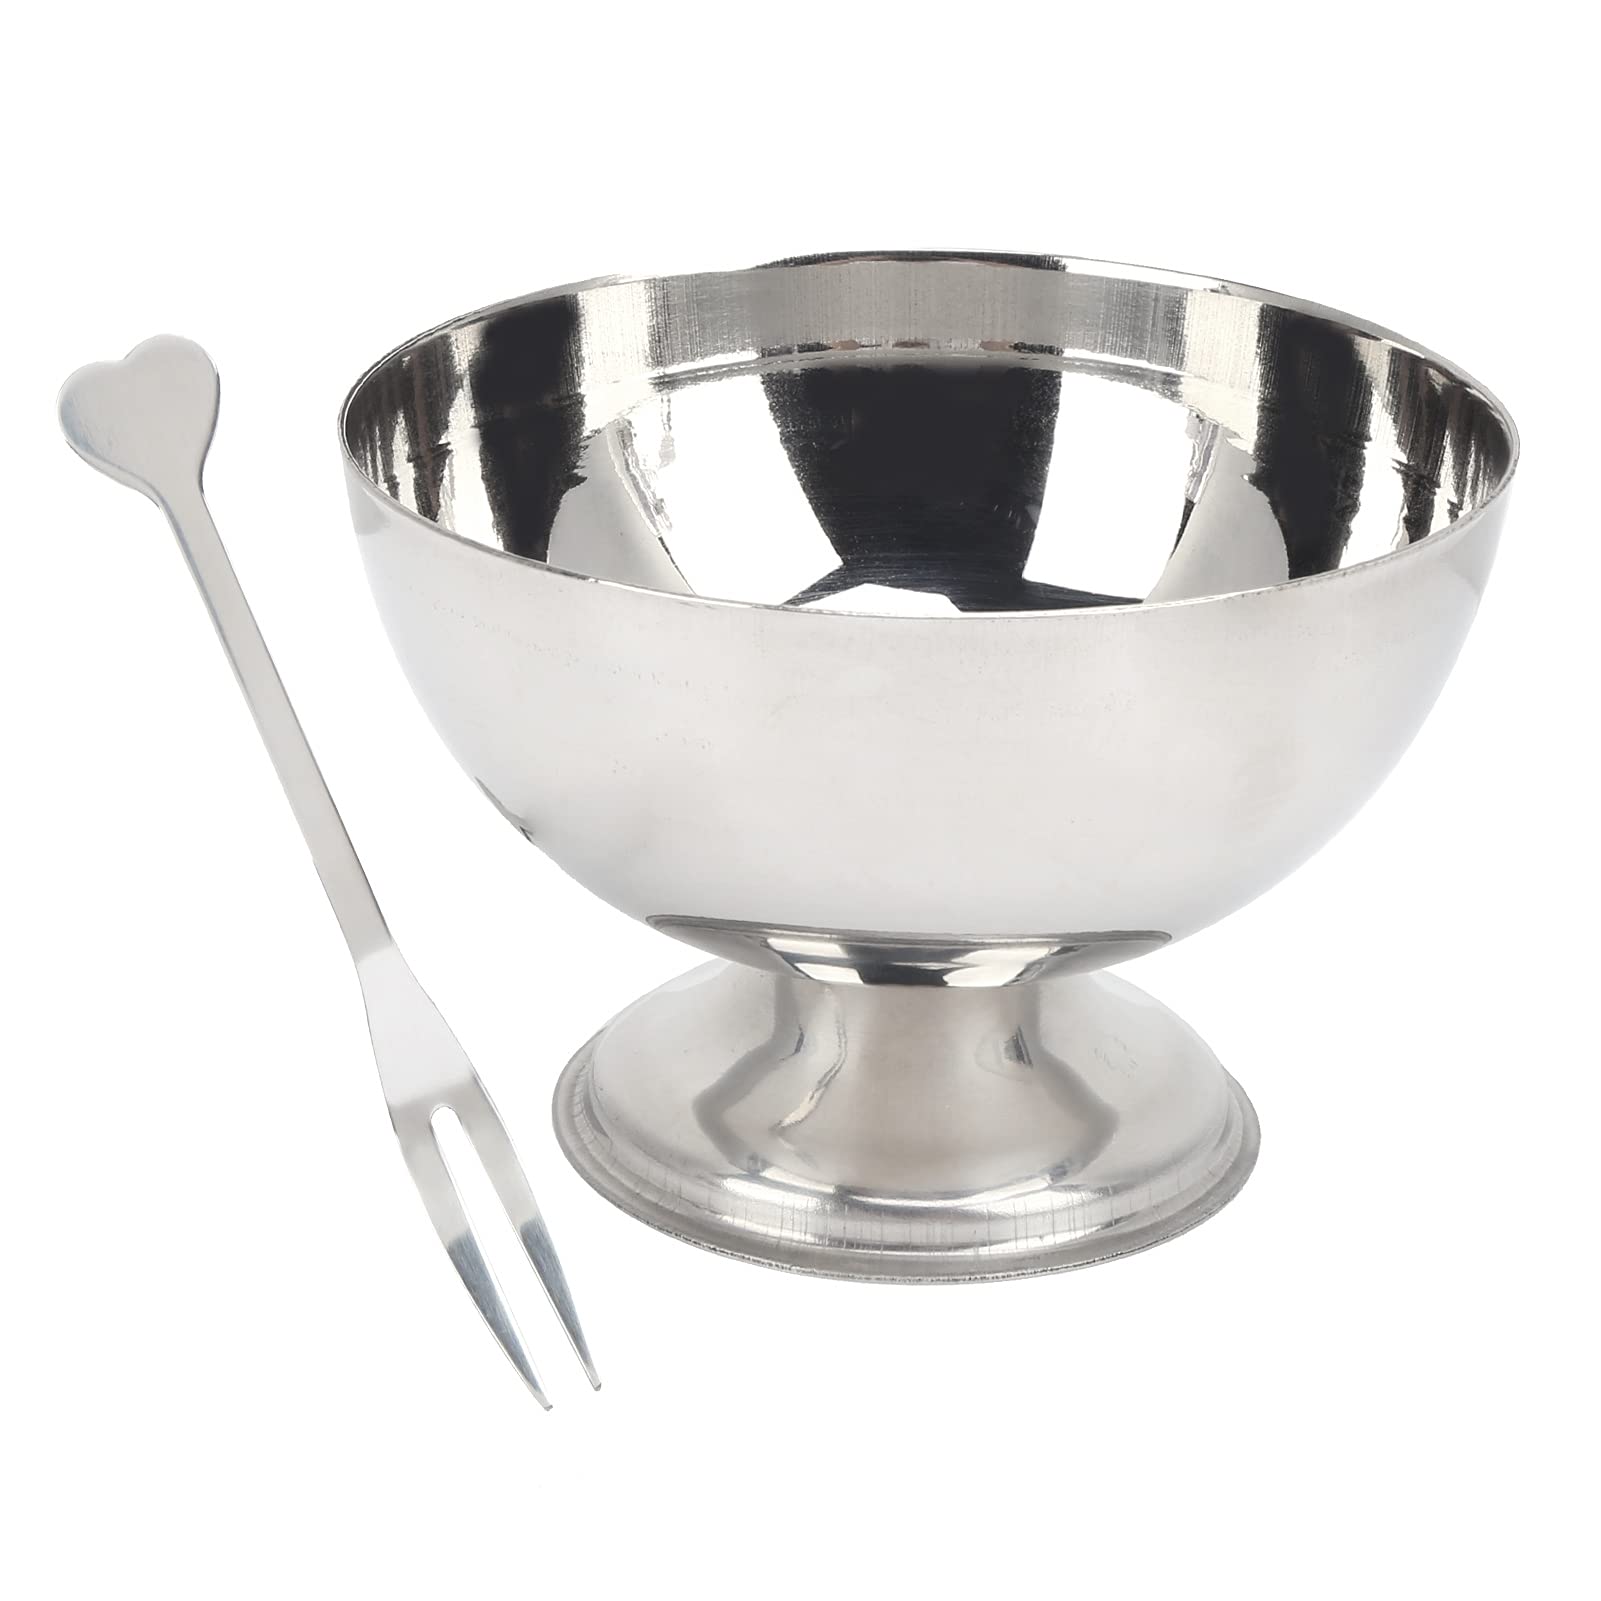 Stainless Steel Dessert Bowl with a Fork, Ice Cream Cup Kitchen Resuable Serving Dessert Dish Bowl for Salad Fruit Pudding on Hotel Restaurants Home Kitchen